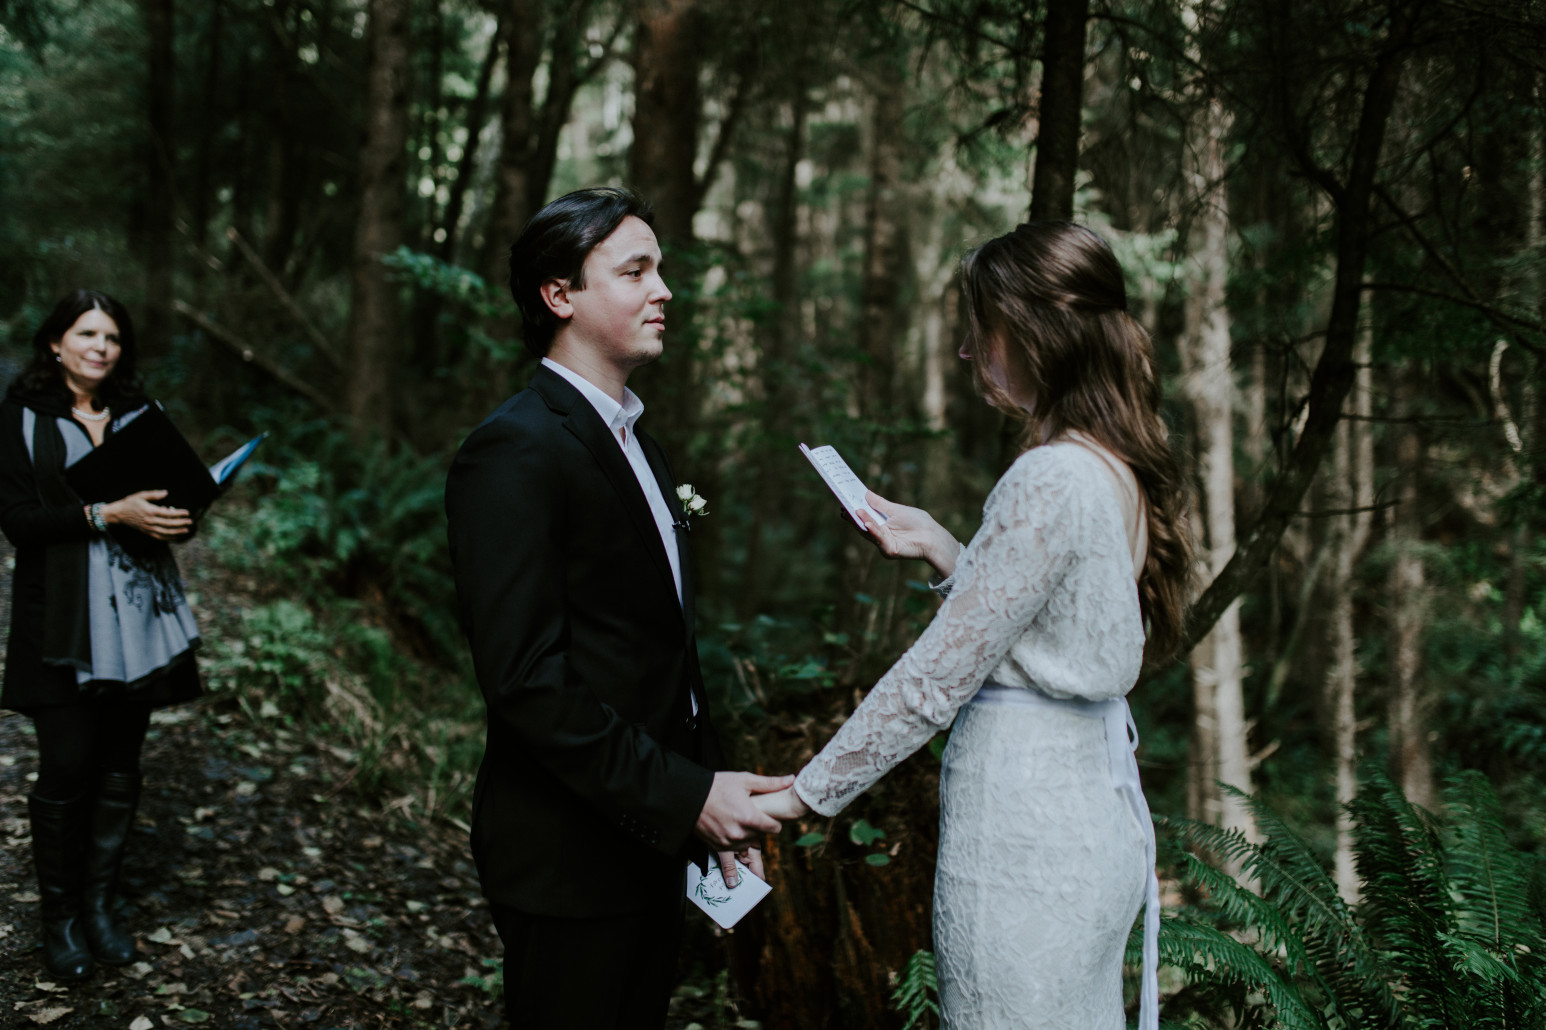 Nicole reads her vows to Vlad during their elopement. Elopement wedding photography at Cannon Beach by Sienna Plus Josh.